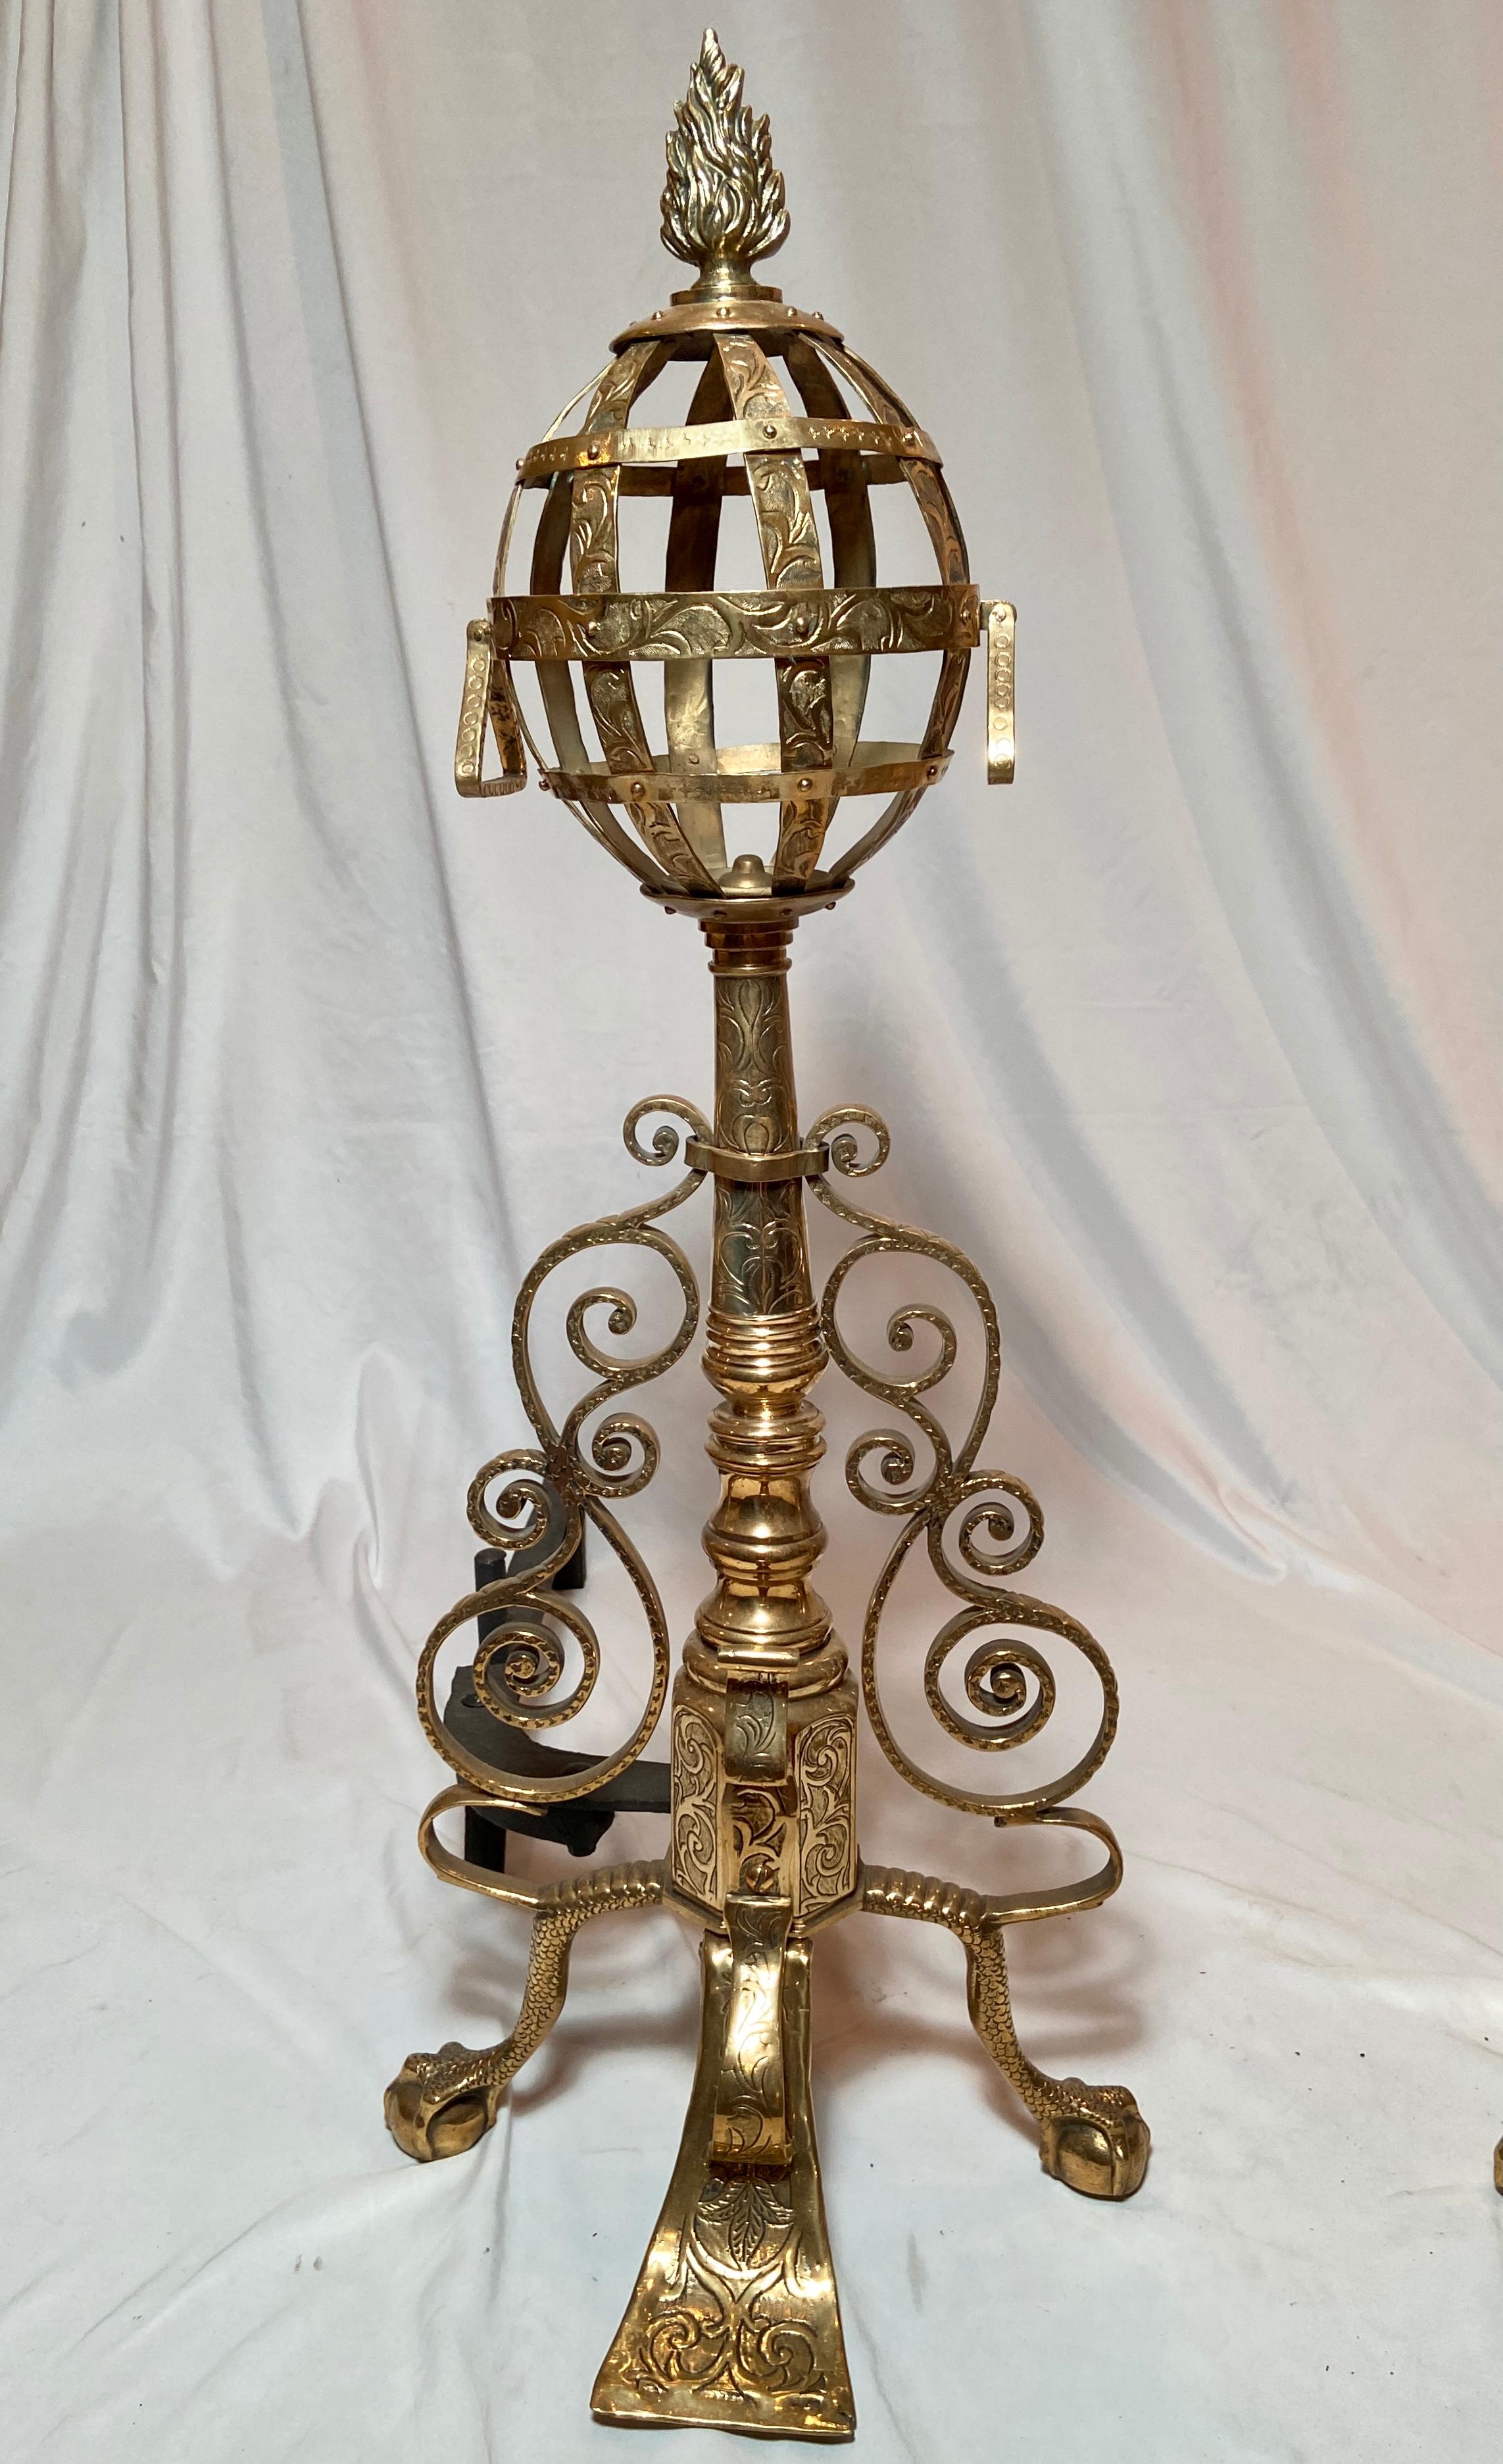 Pair Antique Exceptional English Victorian brass andirons with Scrollwork Design, Circa 1890's.